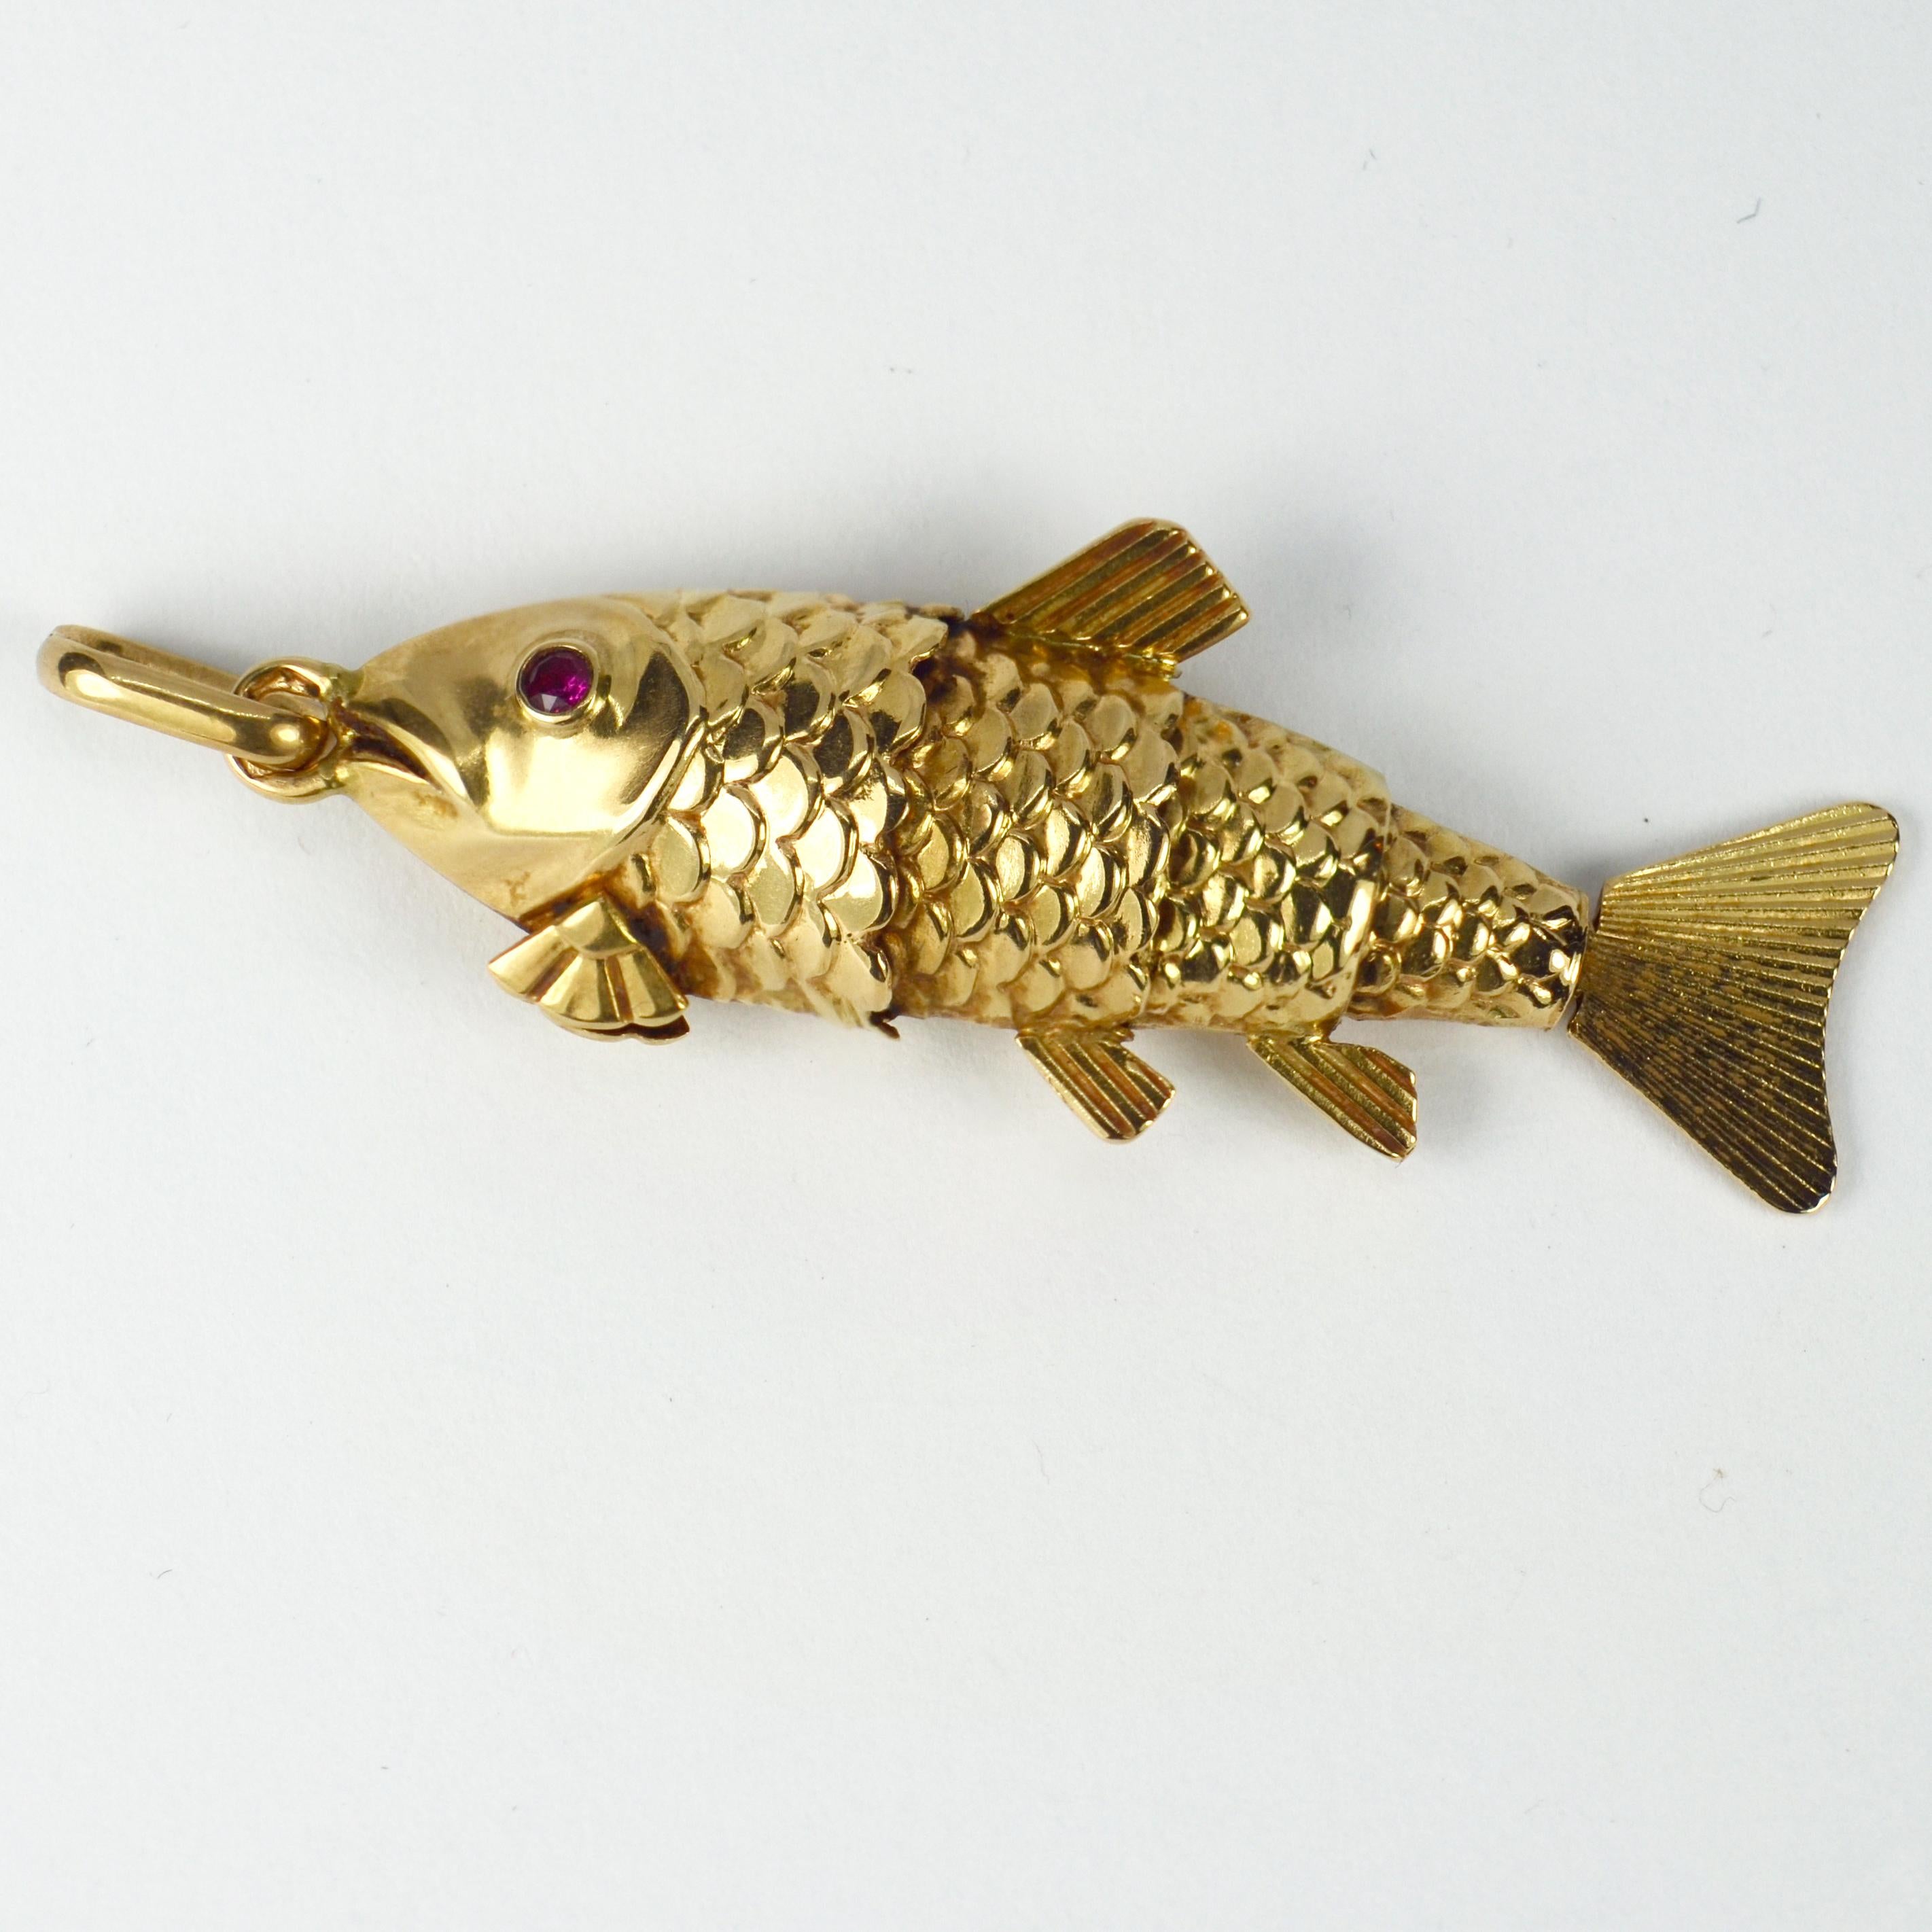 A large French 18 karat (18K) yellow gold charm pendant designed as an articulated fish with red ruby eyes. Stamped with the French eagle’s head for 18 karat gold and an unknown maker’s mark.

Dimensions: 4.1 x 1.5 x 0.85 cm (not including jump